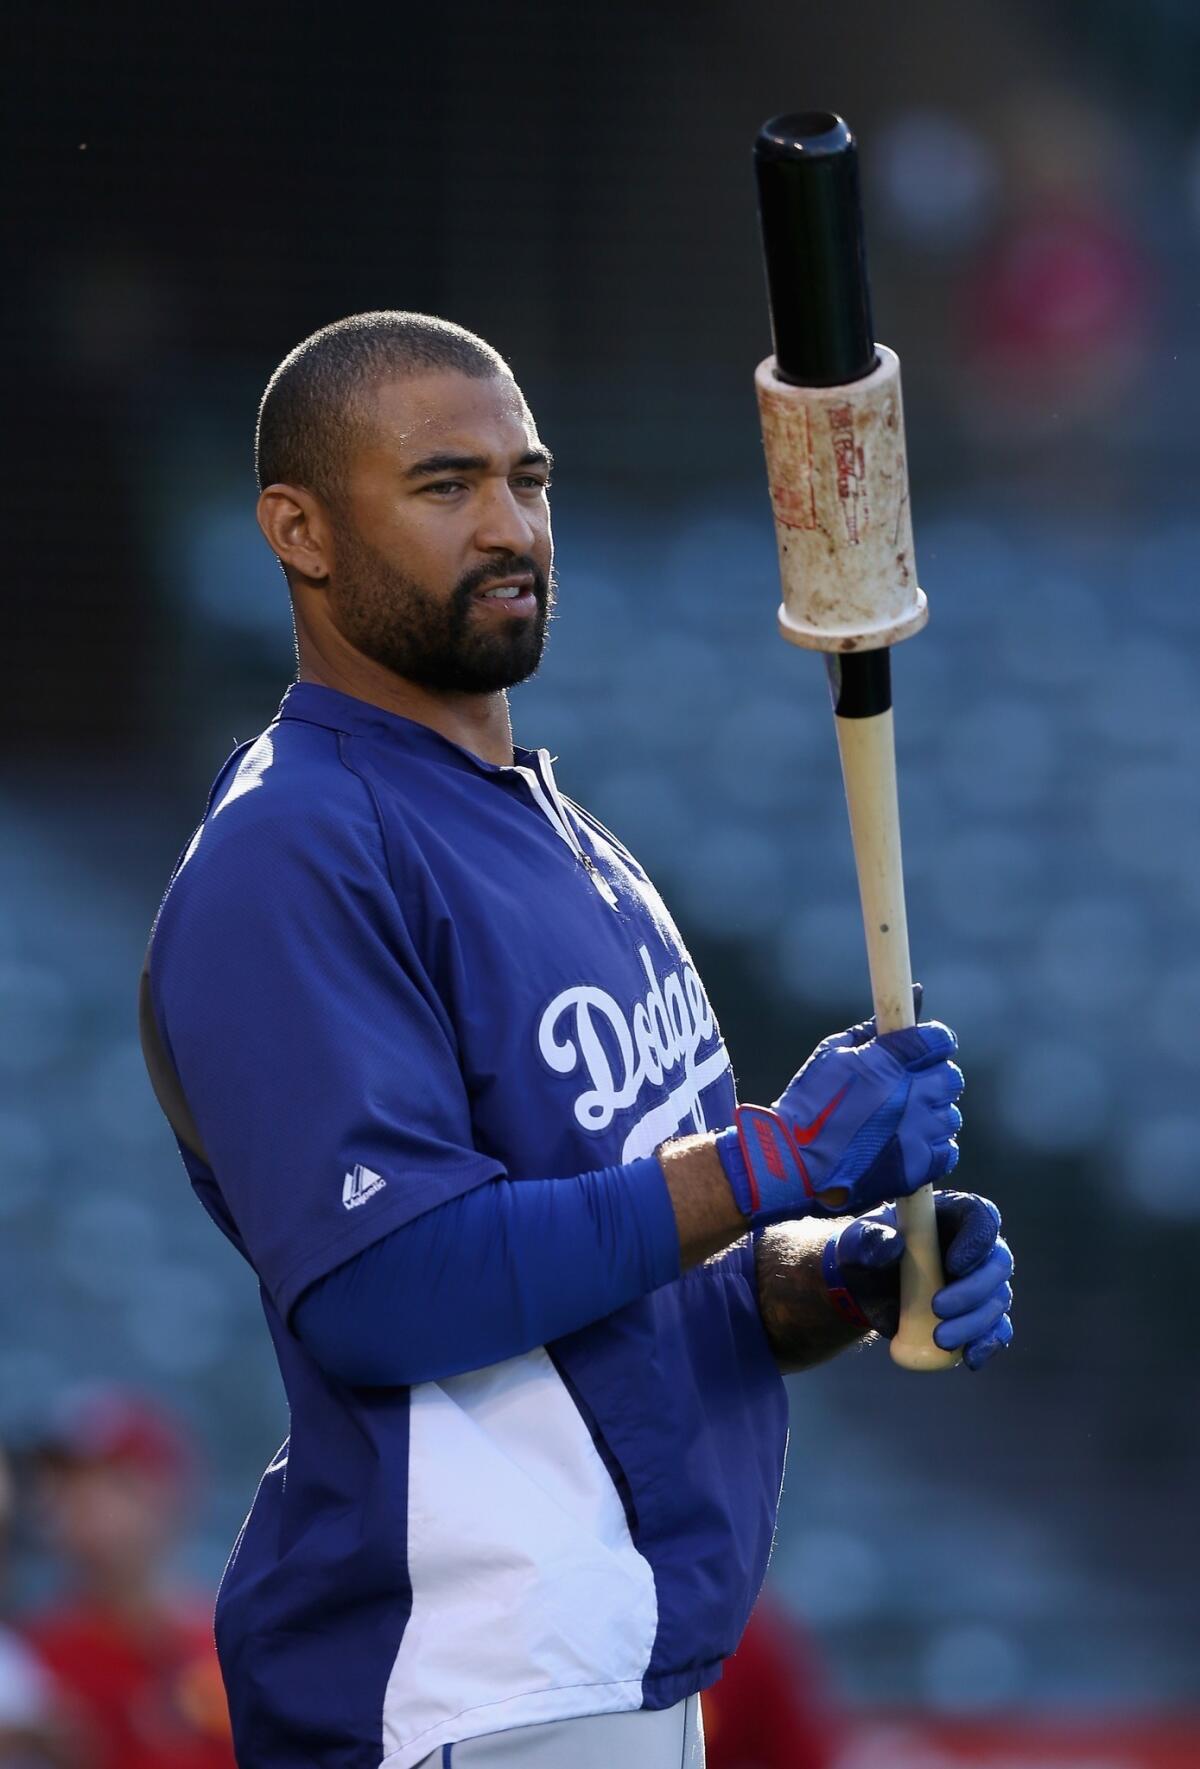 Dodgers center fielder Matt Kemp probably will not play in this week's series against the Toronto Blue Jays.